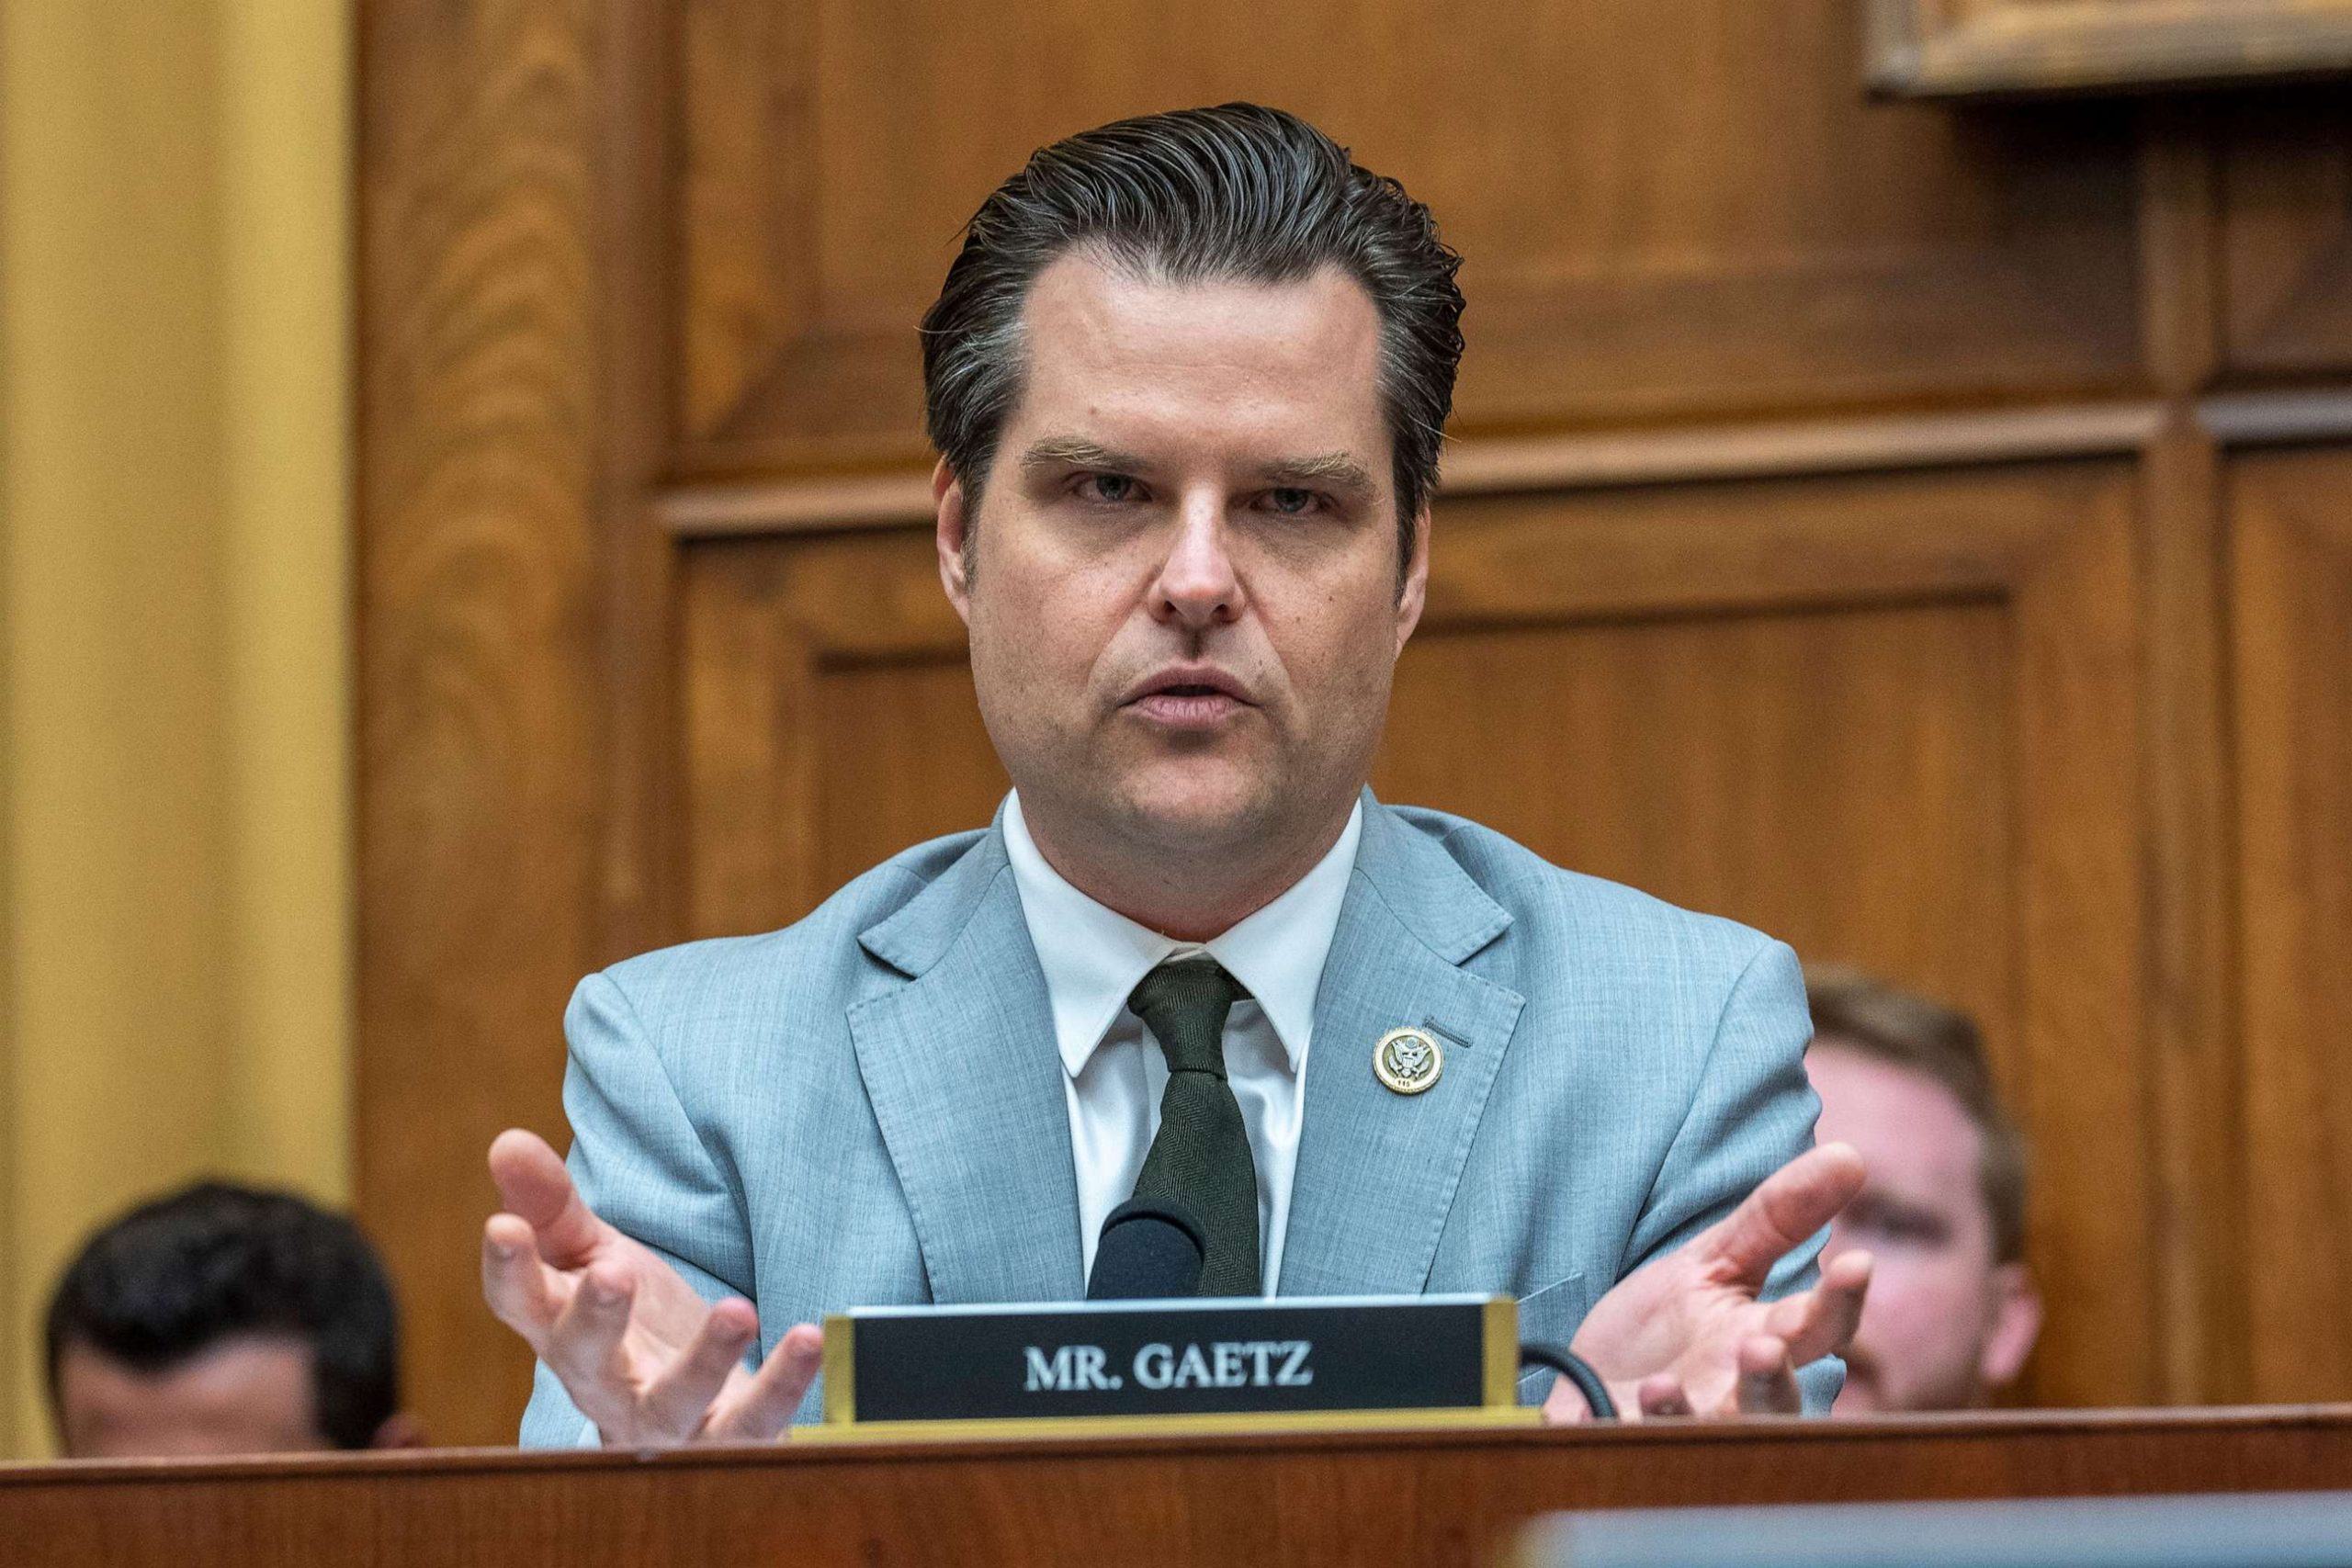 Sources report that Rep. Matt Gaetz has been subpoenaed in a defamation suit by a woman he allegedly had sex with as a minor.